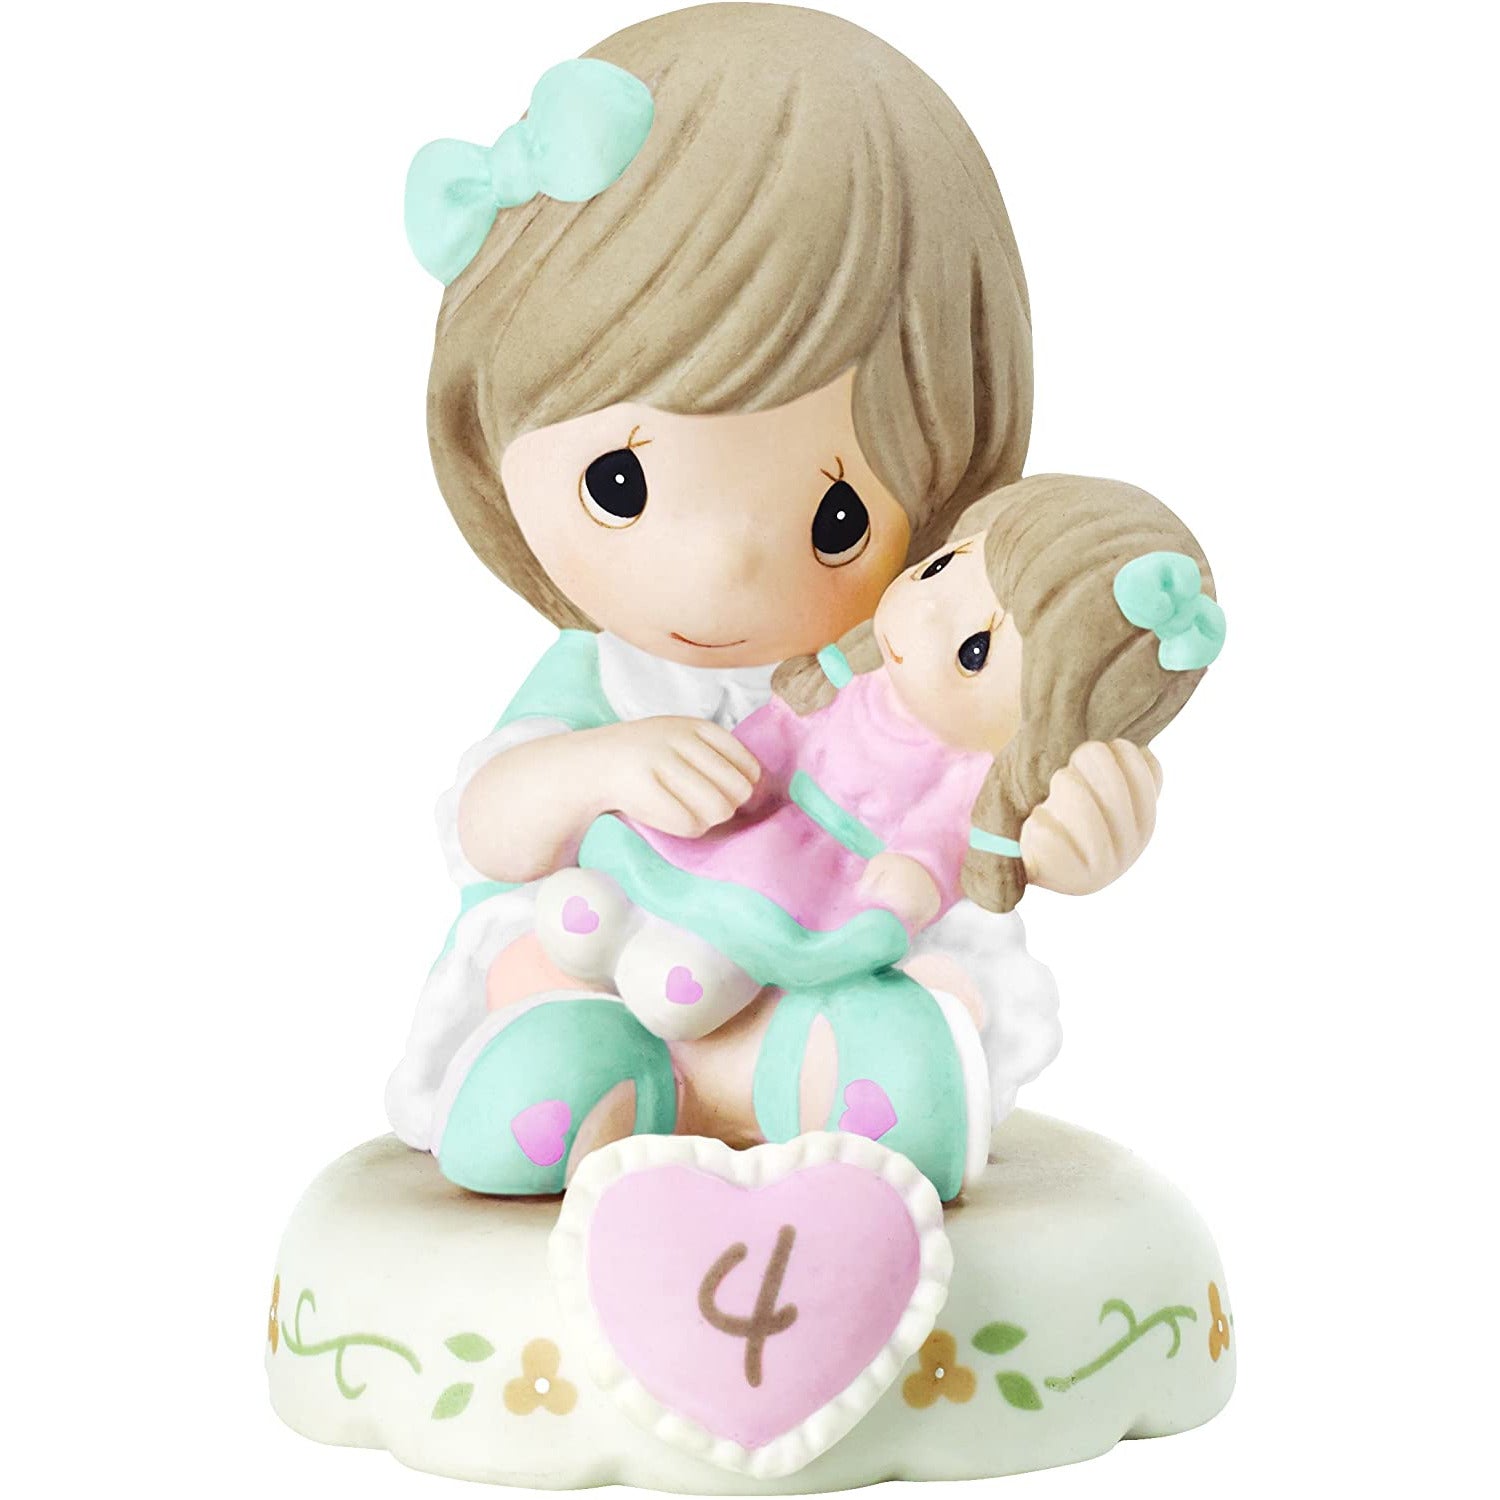 Precious Moments 152010 "Growing In Grace, Age 4" Girl Bisque Porcelain Figurine Birthday Gift